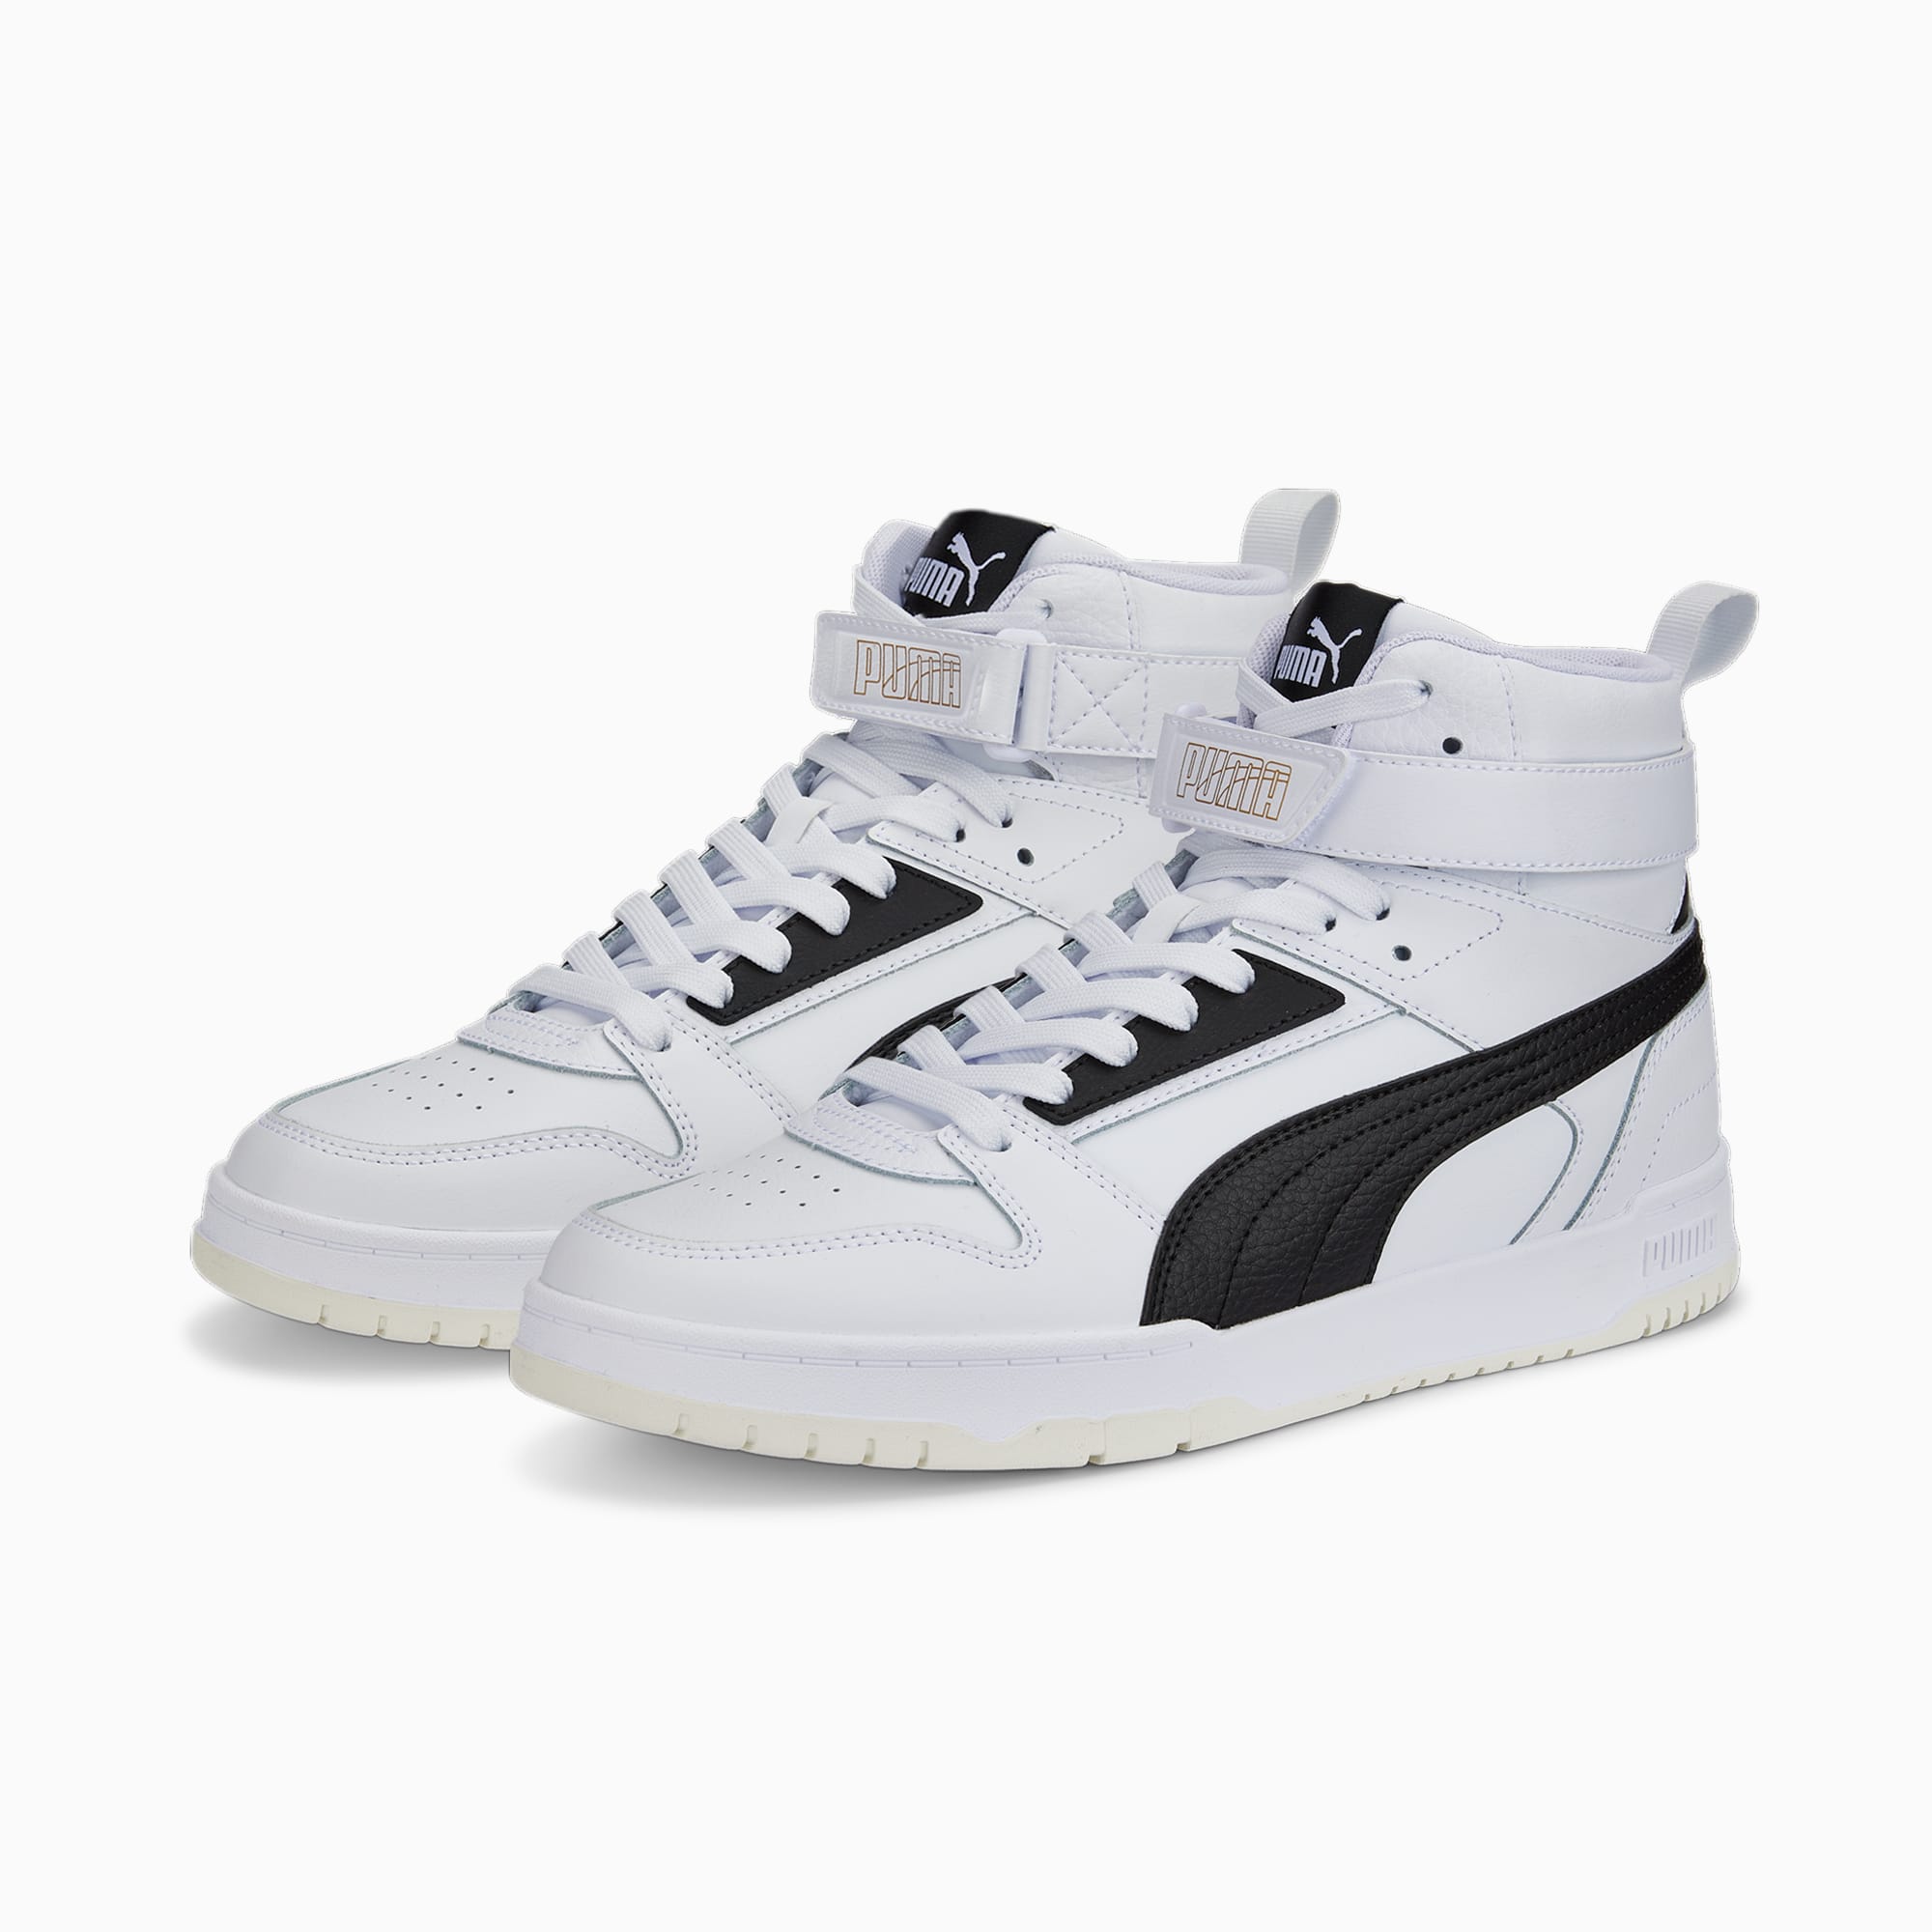 Men's PUMA Rbd Game Sneakers, White/Black/Gold, Size 35,5, Shoes